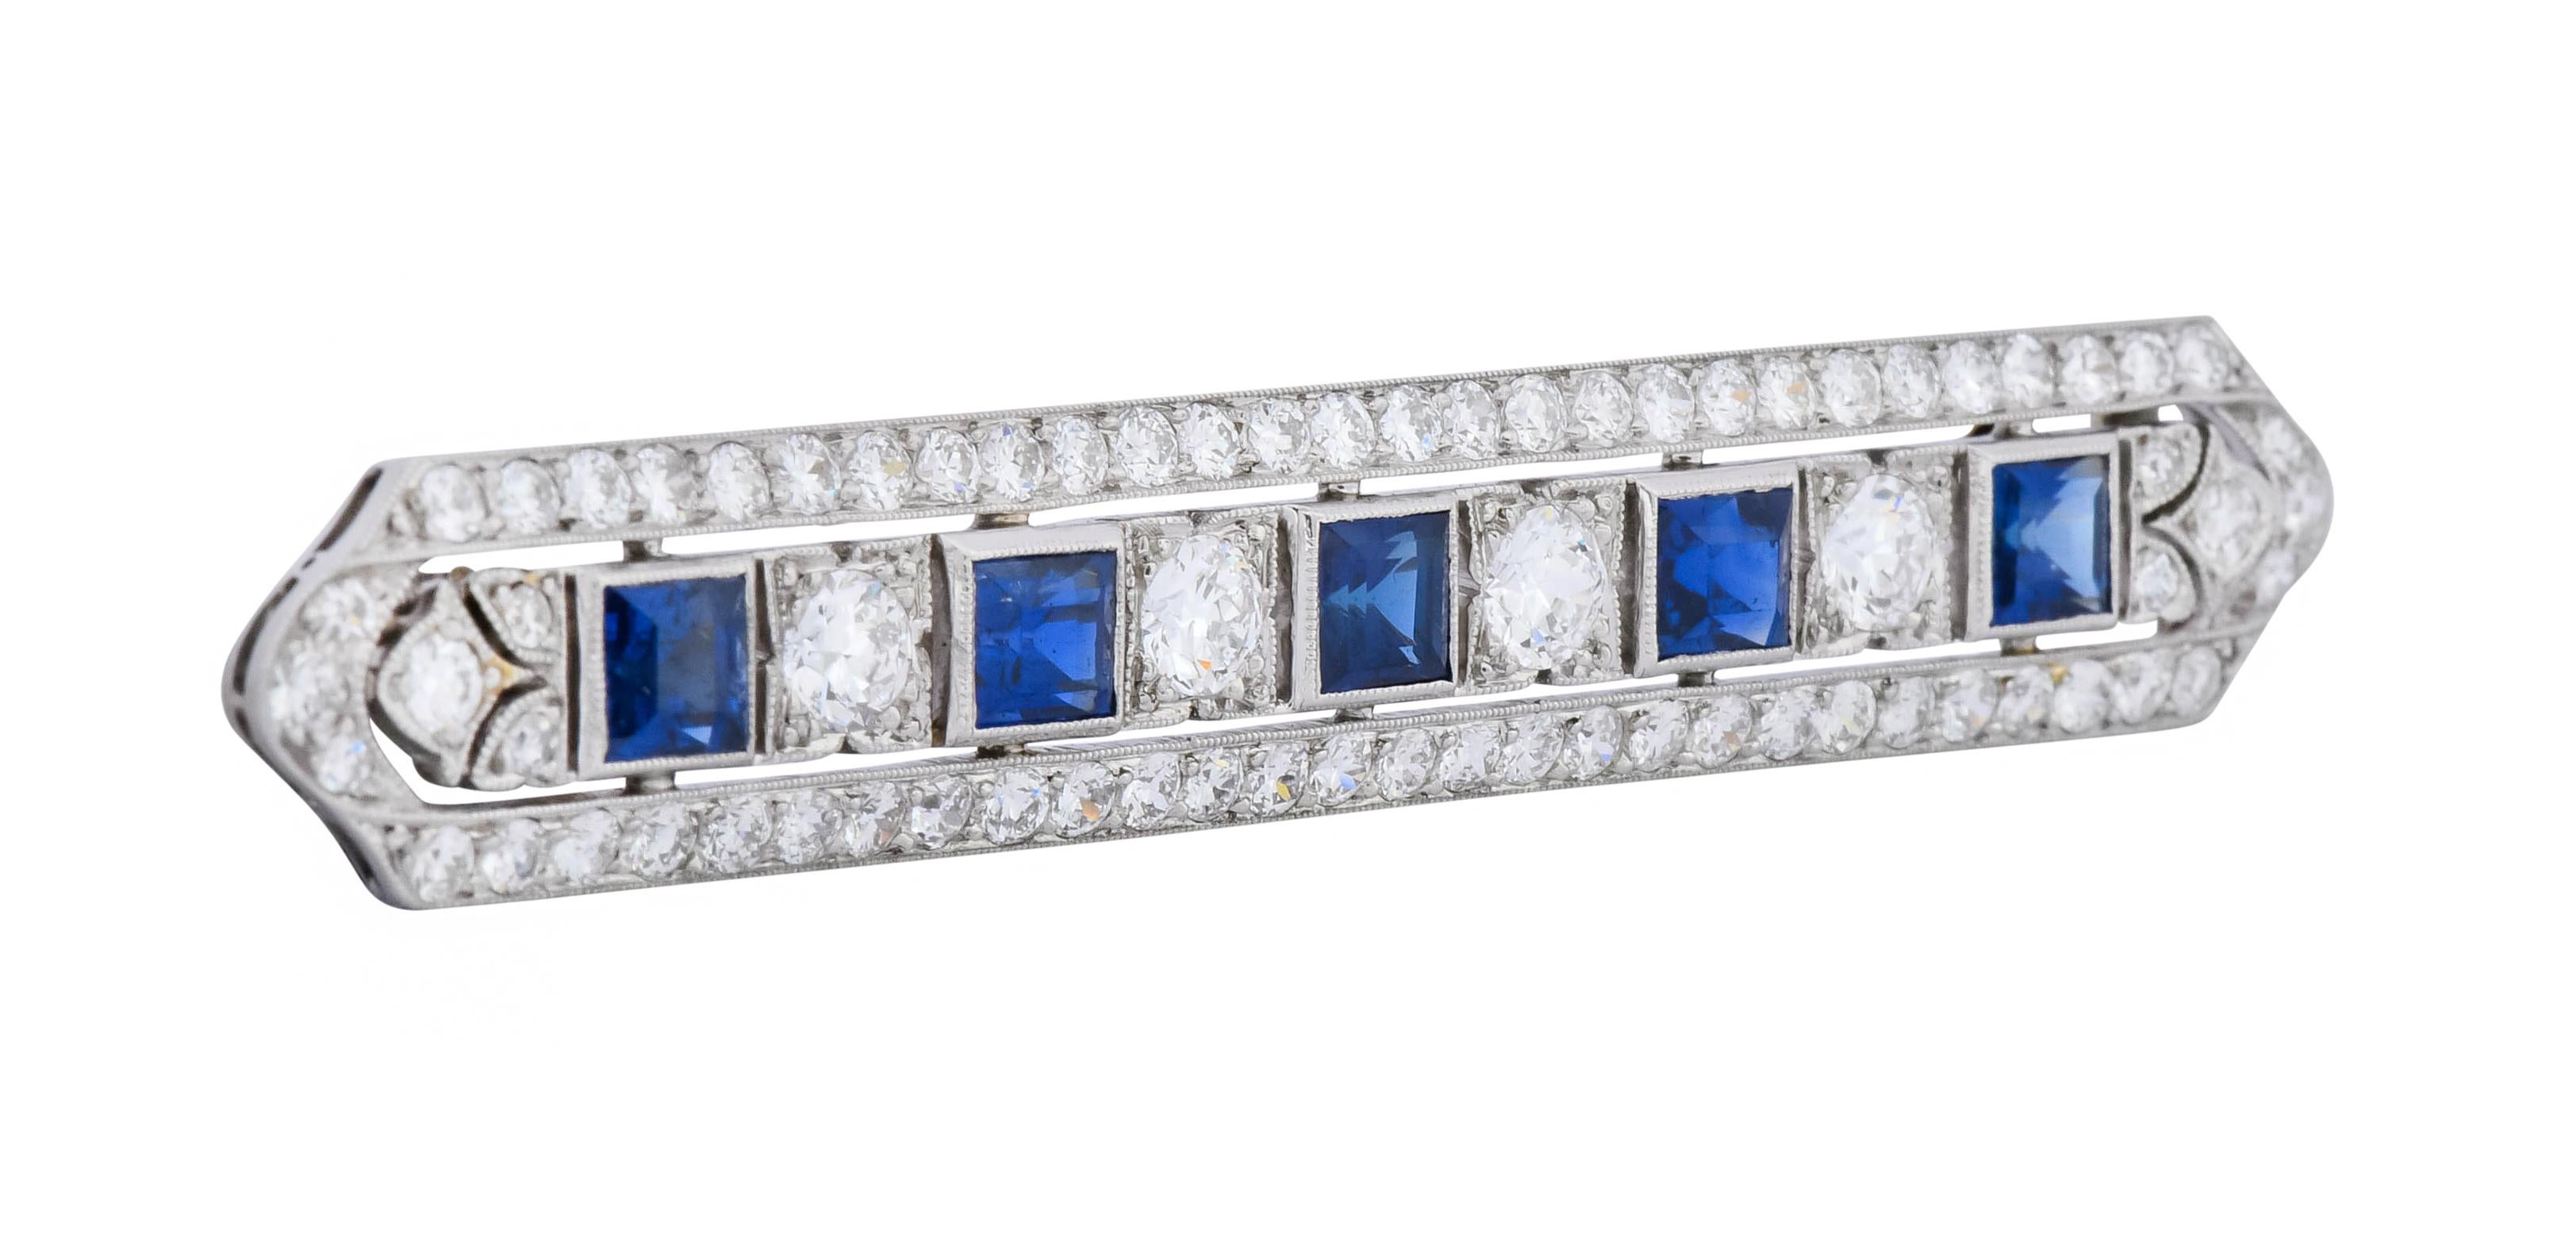 Bar style brooch centering five square cut sapphire weighing approximately 2.00 carats total, very well-matched and bright blue in color

Bezel set East to West in an elongated millegrain frame bead set throughout by round brilliant and single cut